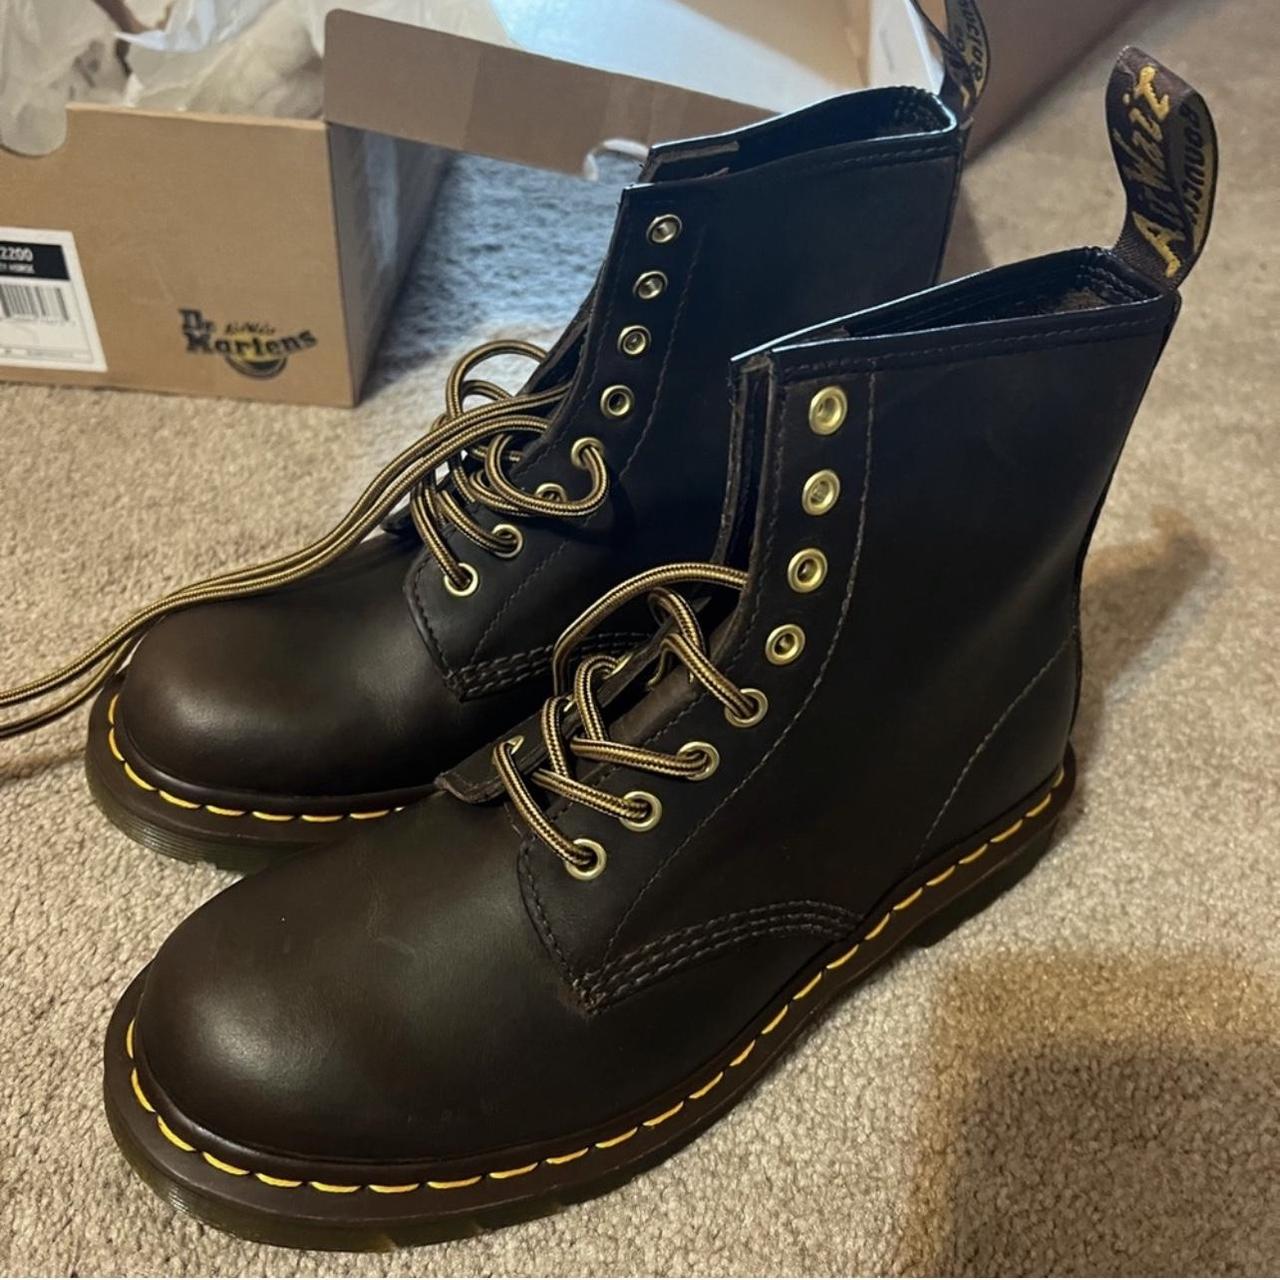 Dr. Martens Crazy Horse Boots in a Woman’s Size 8.... - Depop